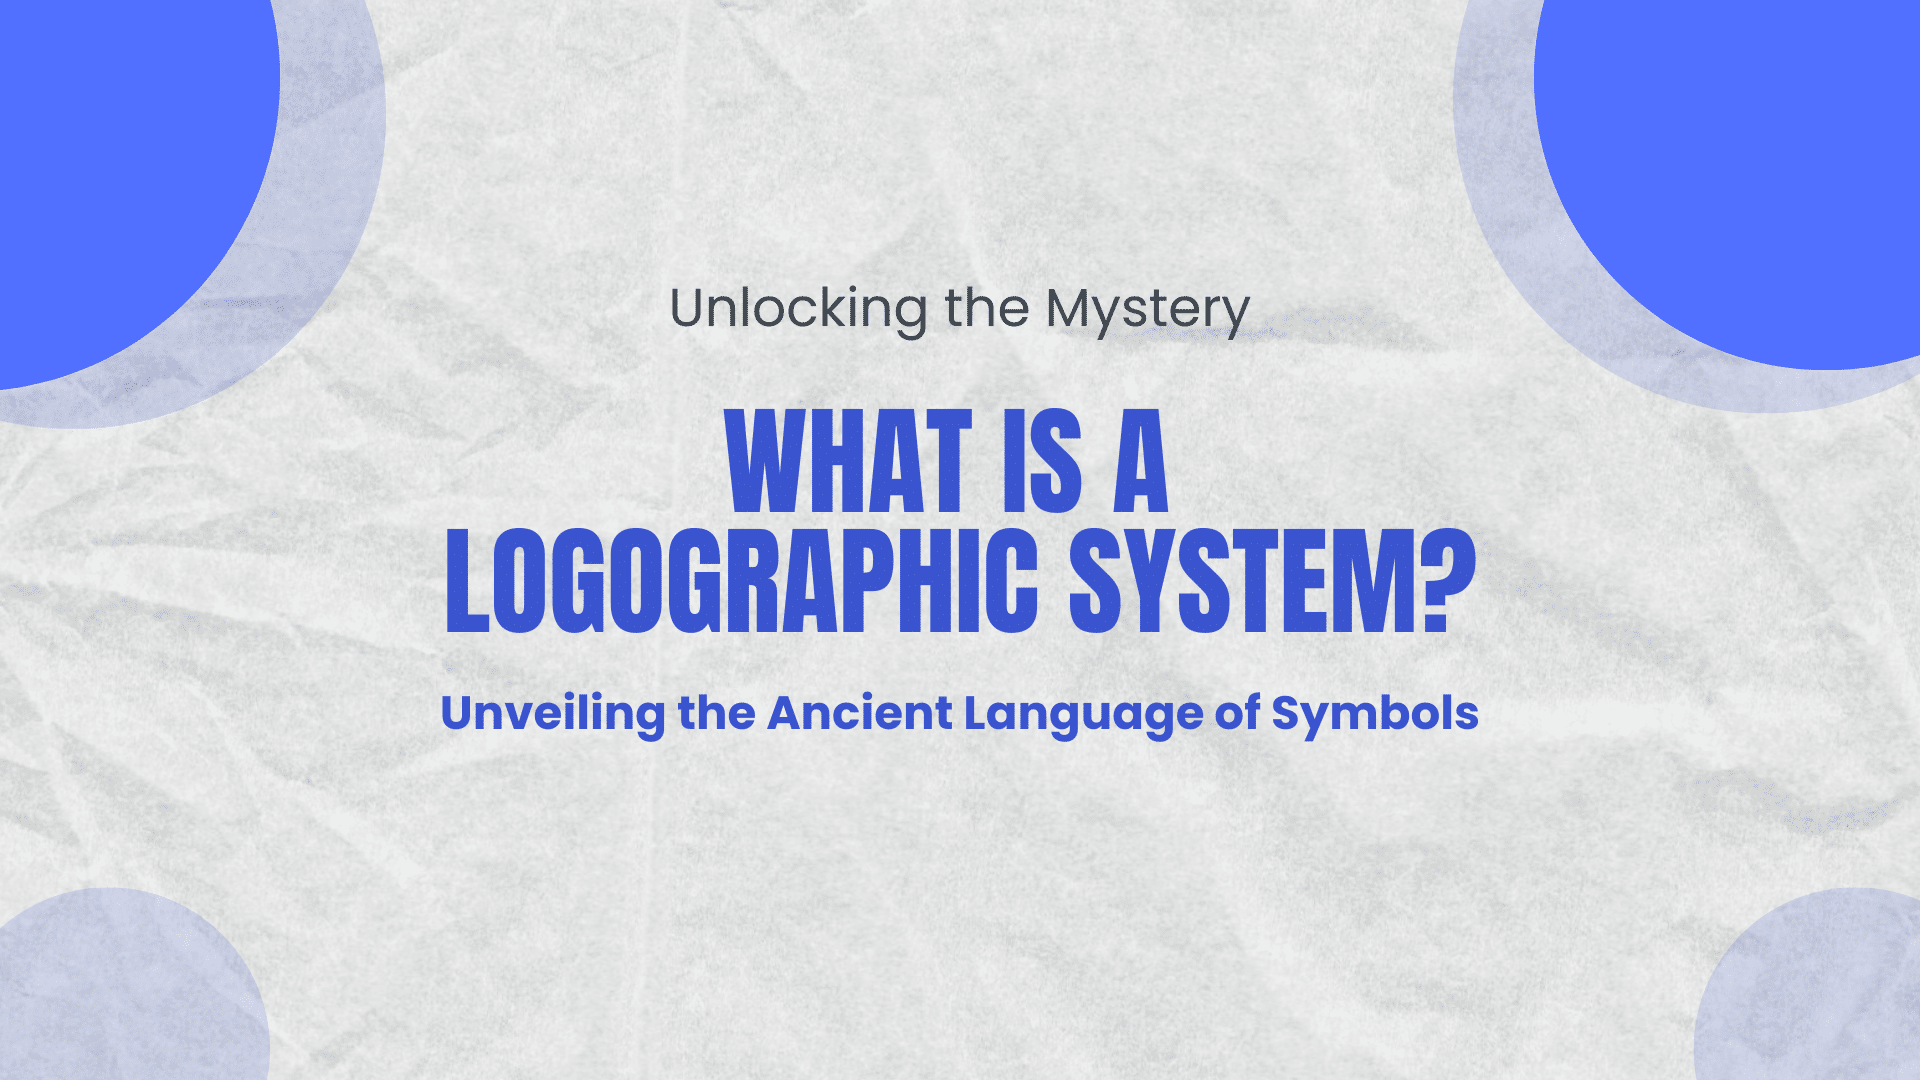 What is a logographic system